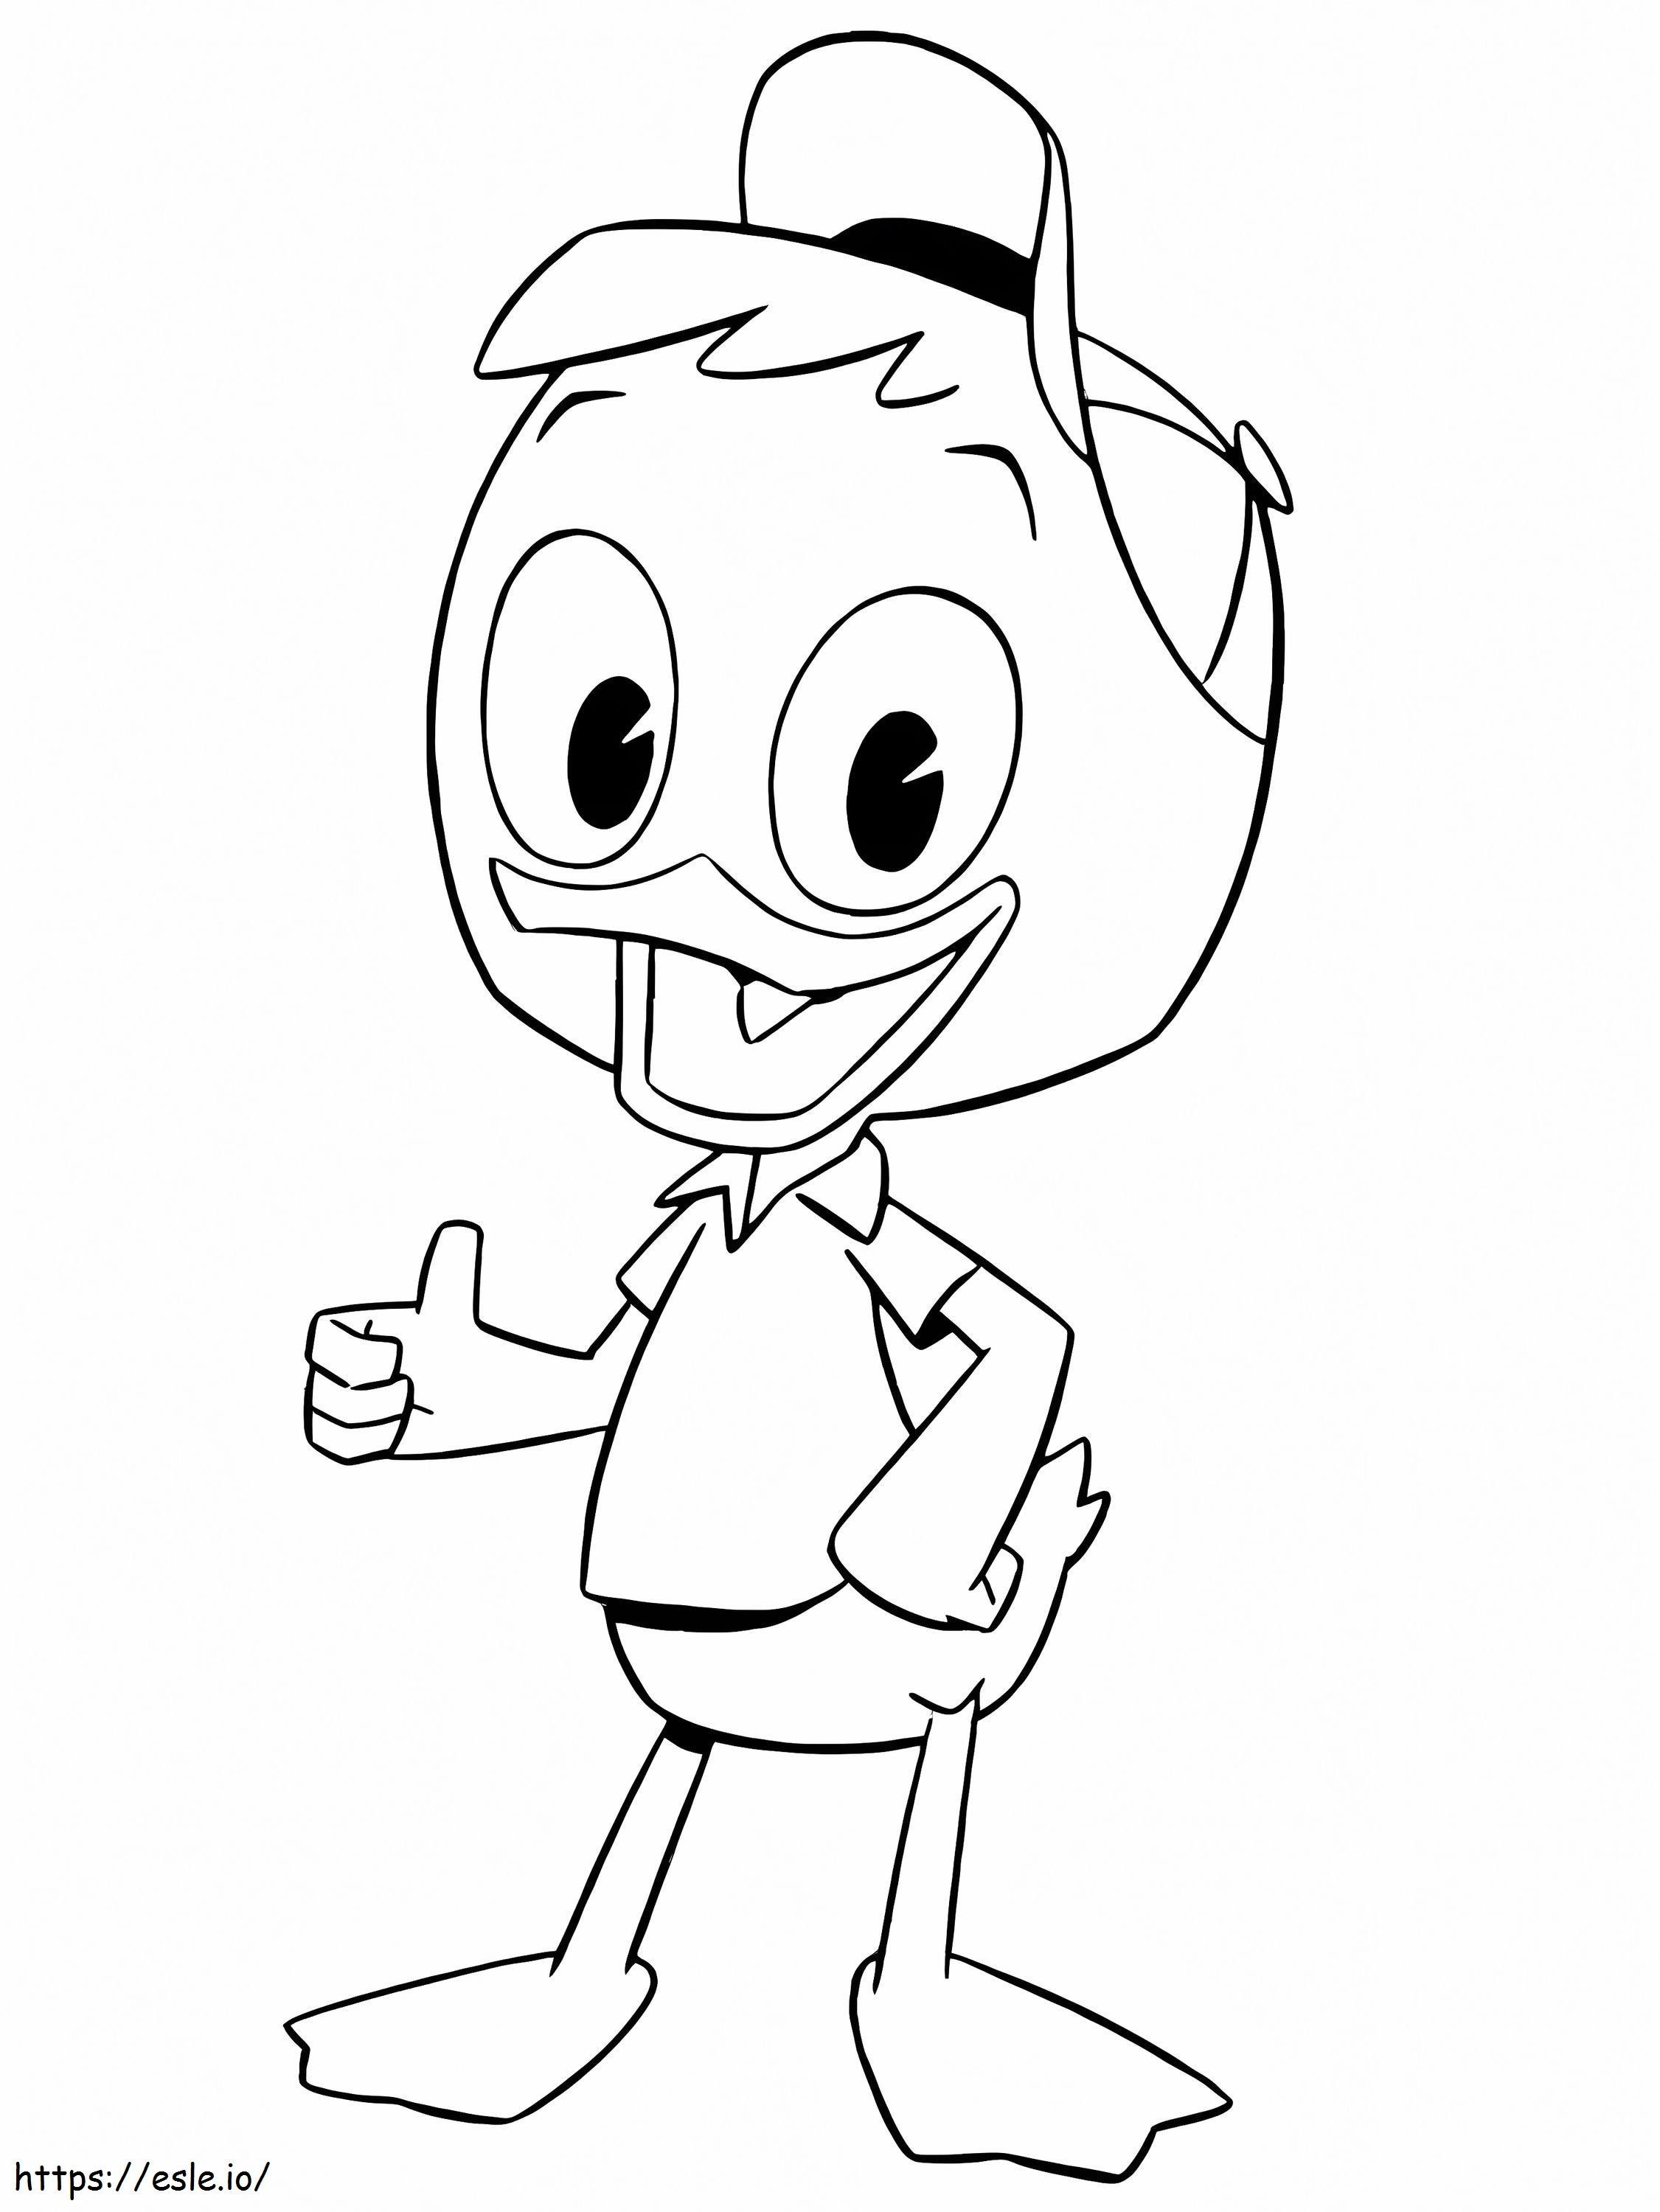 Contento Ducks From Ducktales 2 coloring page